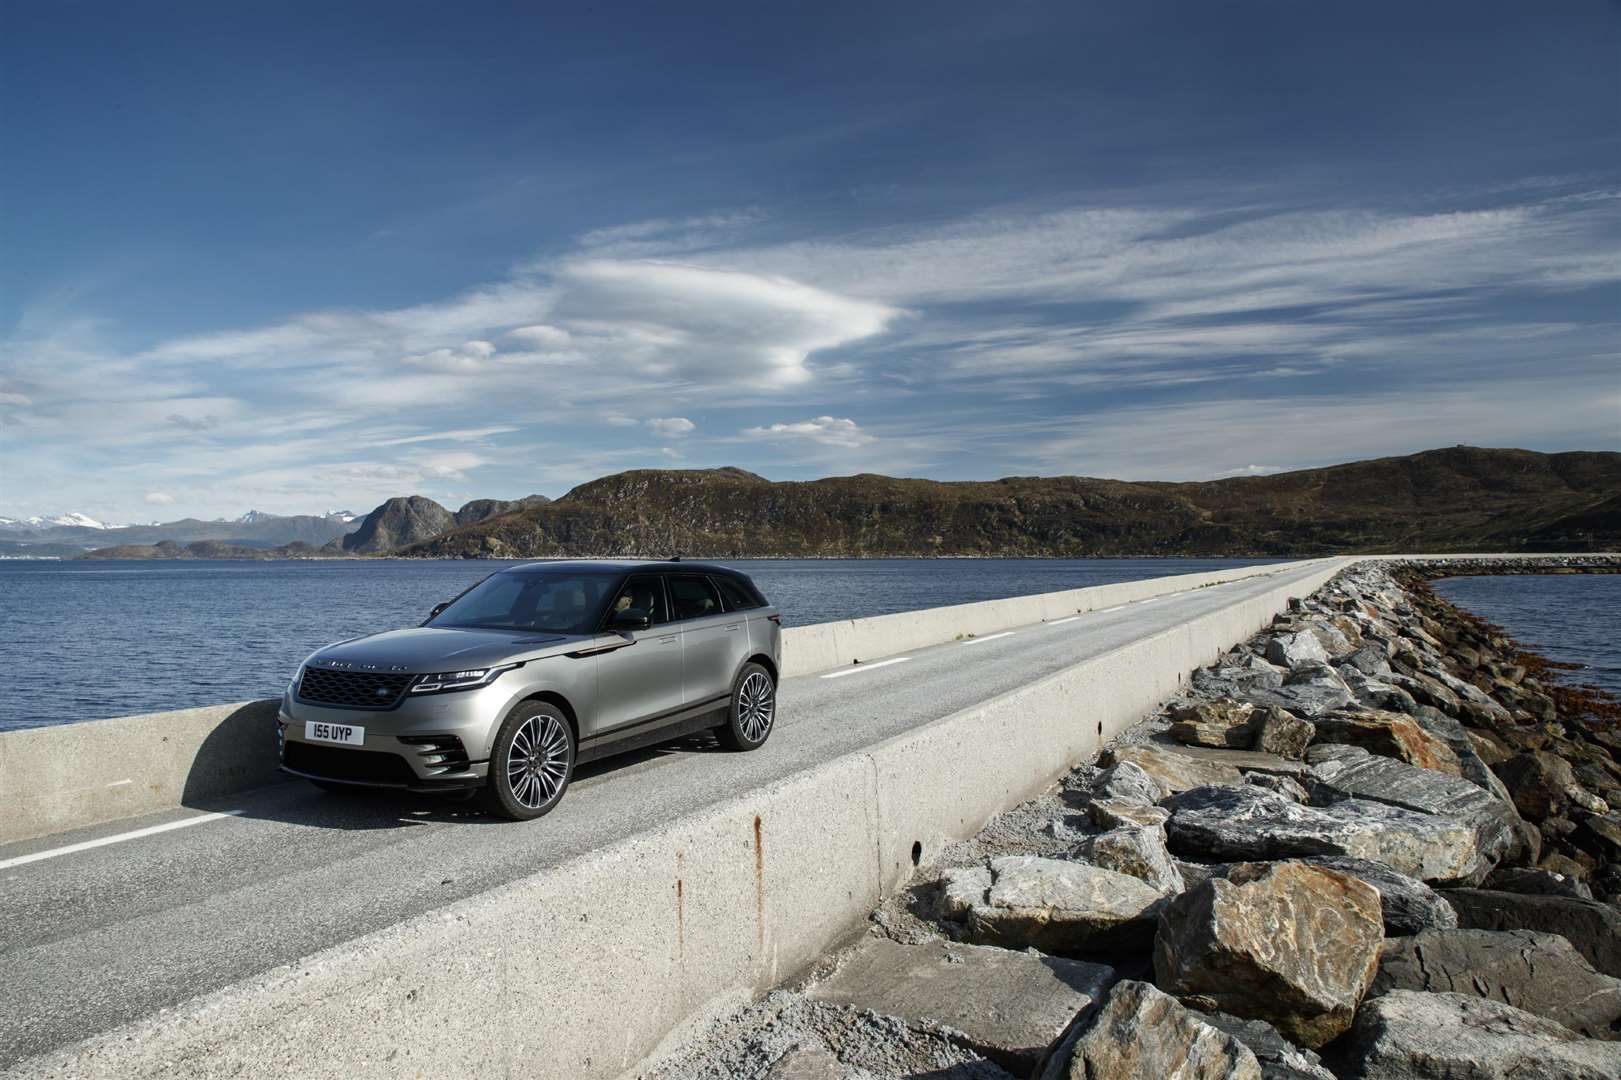 The Velar’s styling showcases features that are likely to make an appearance on future models (2322116)